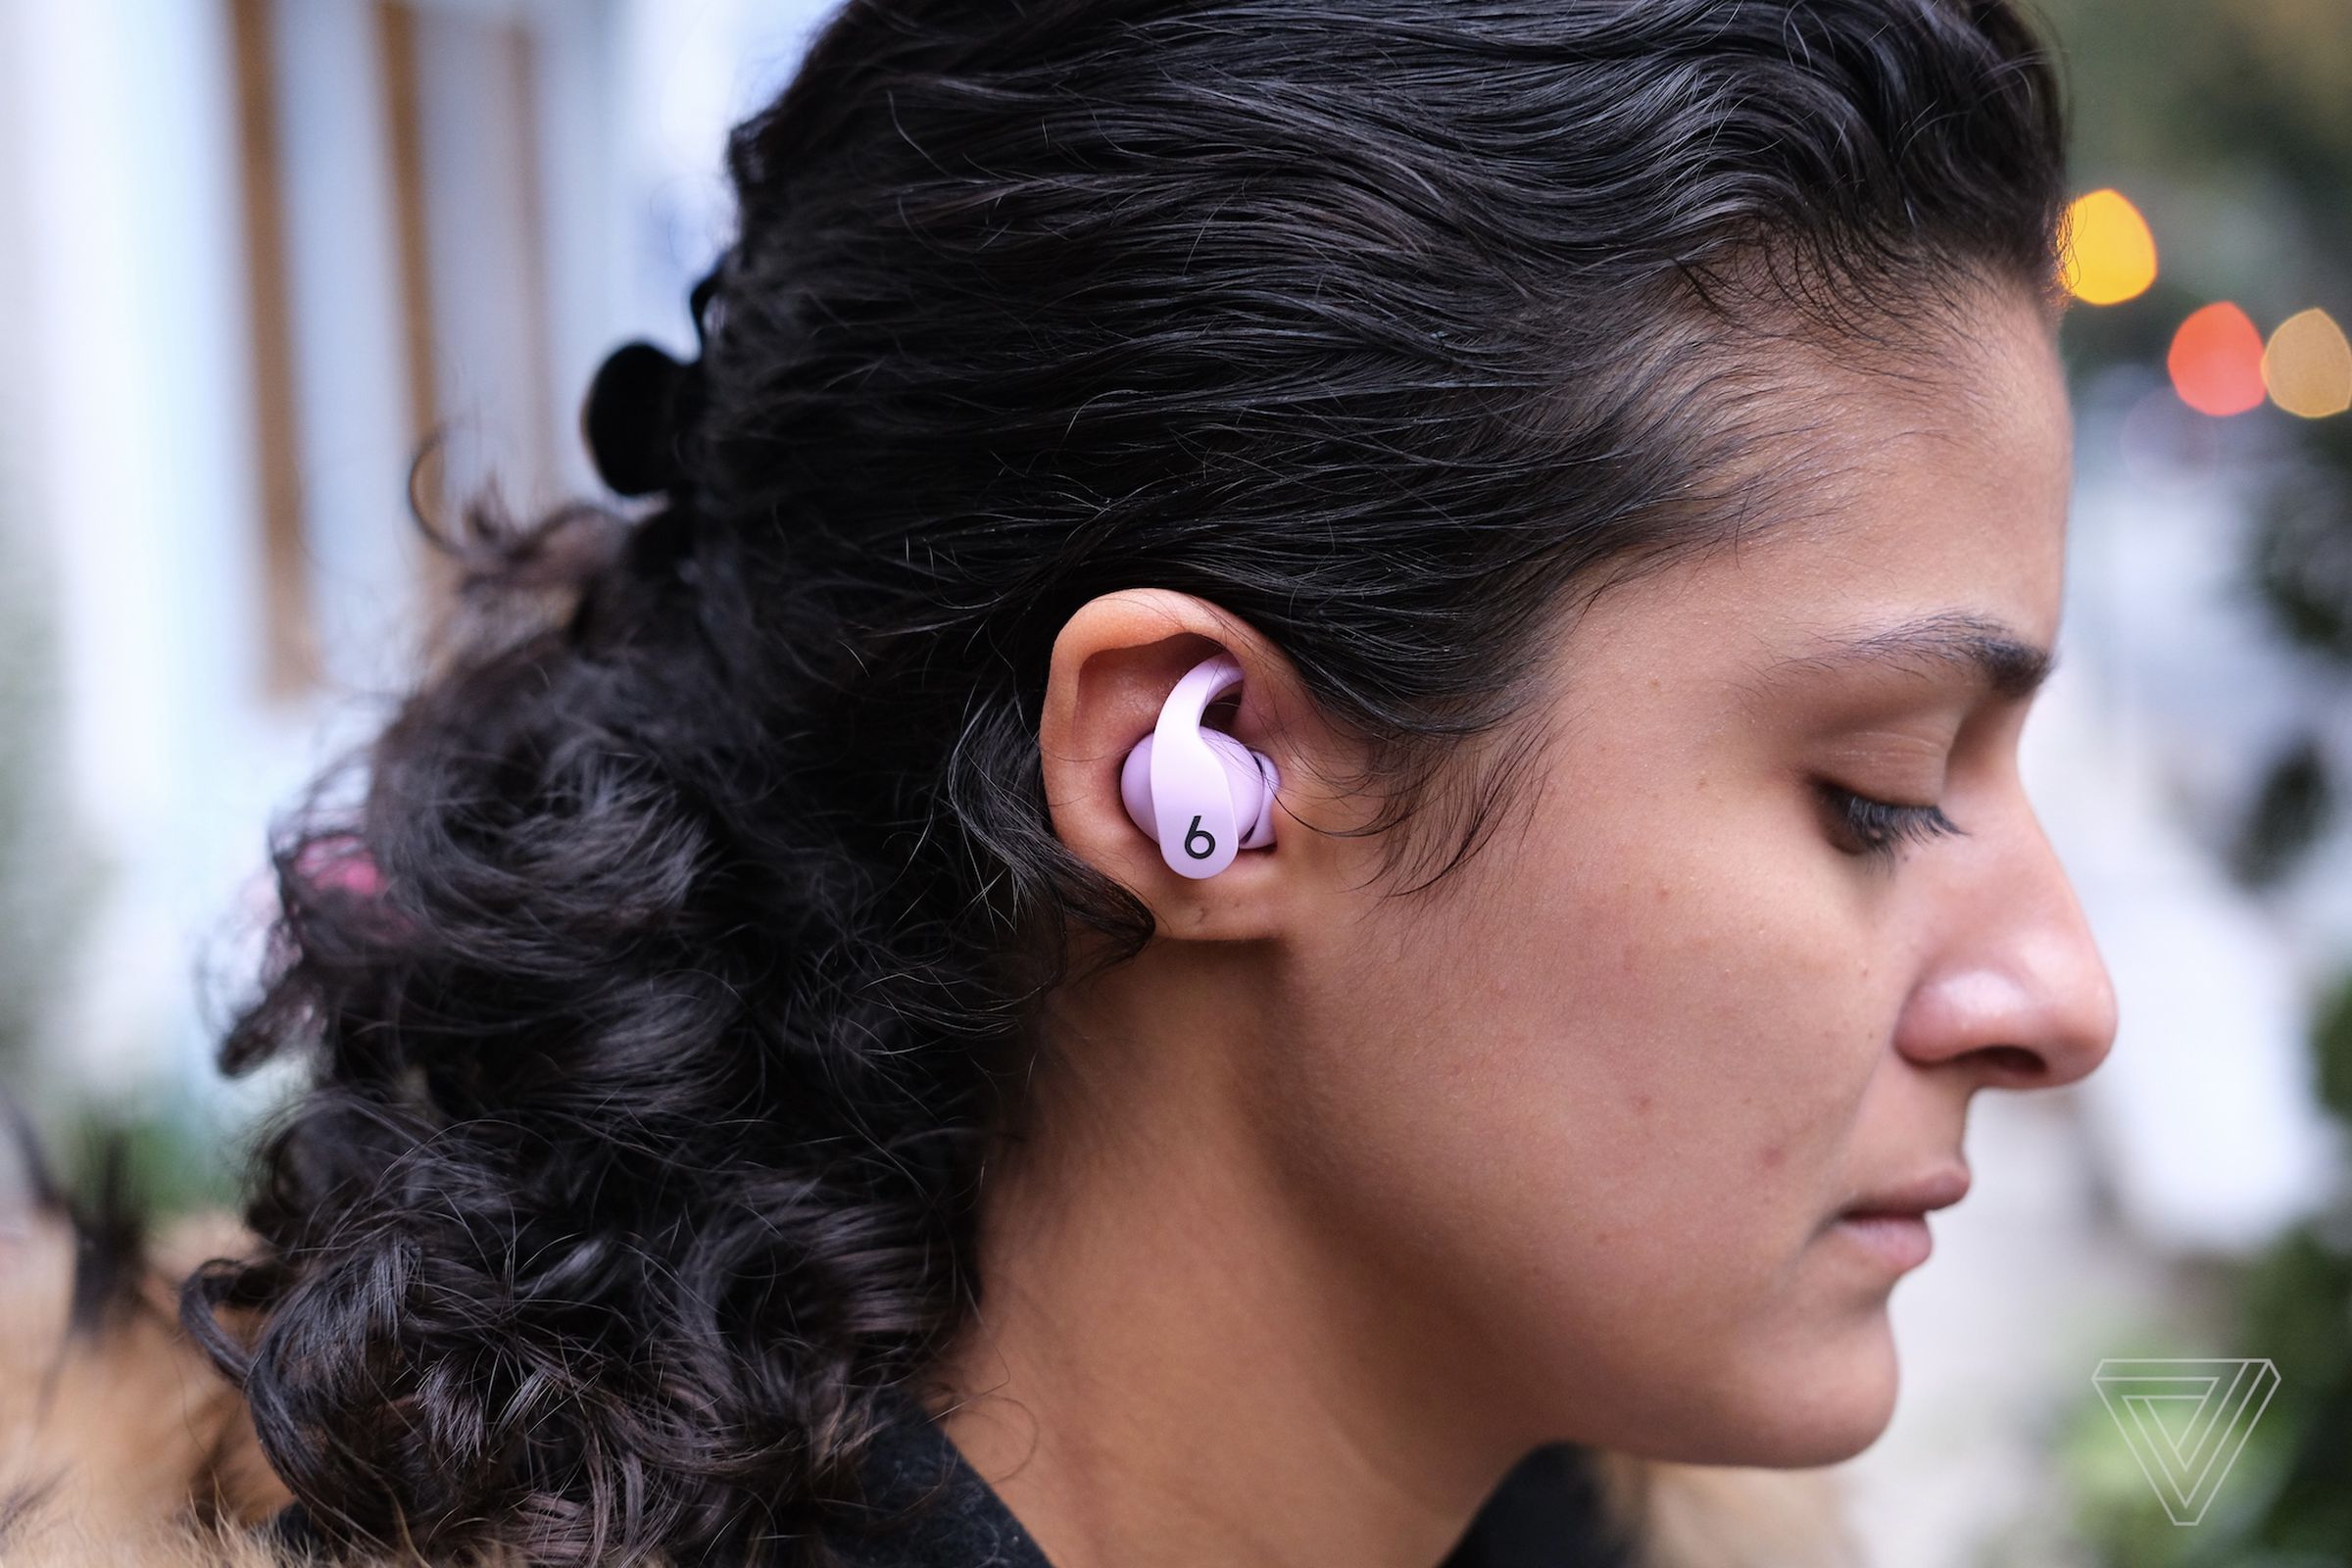 A photo of pink Beats Fit Pro earbuds in a woman’s ear.